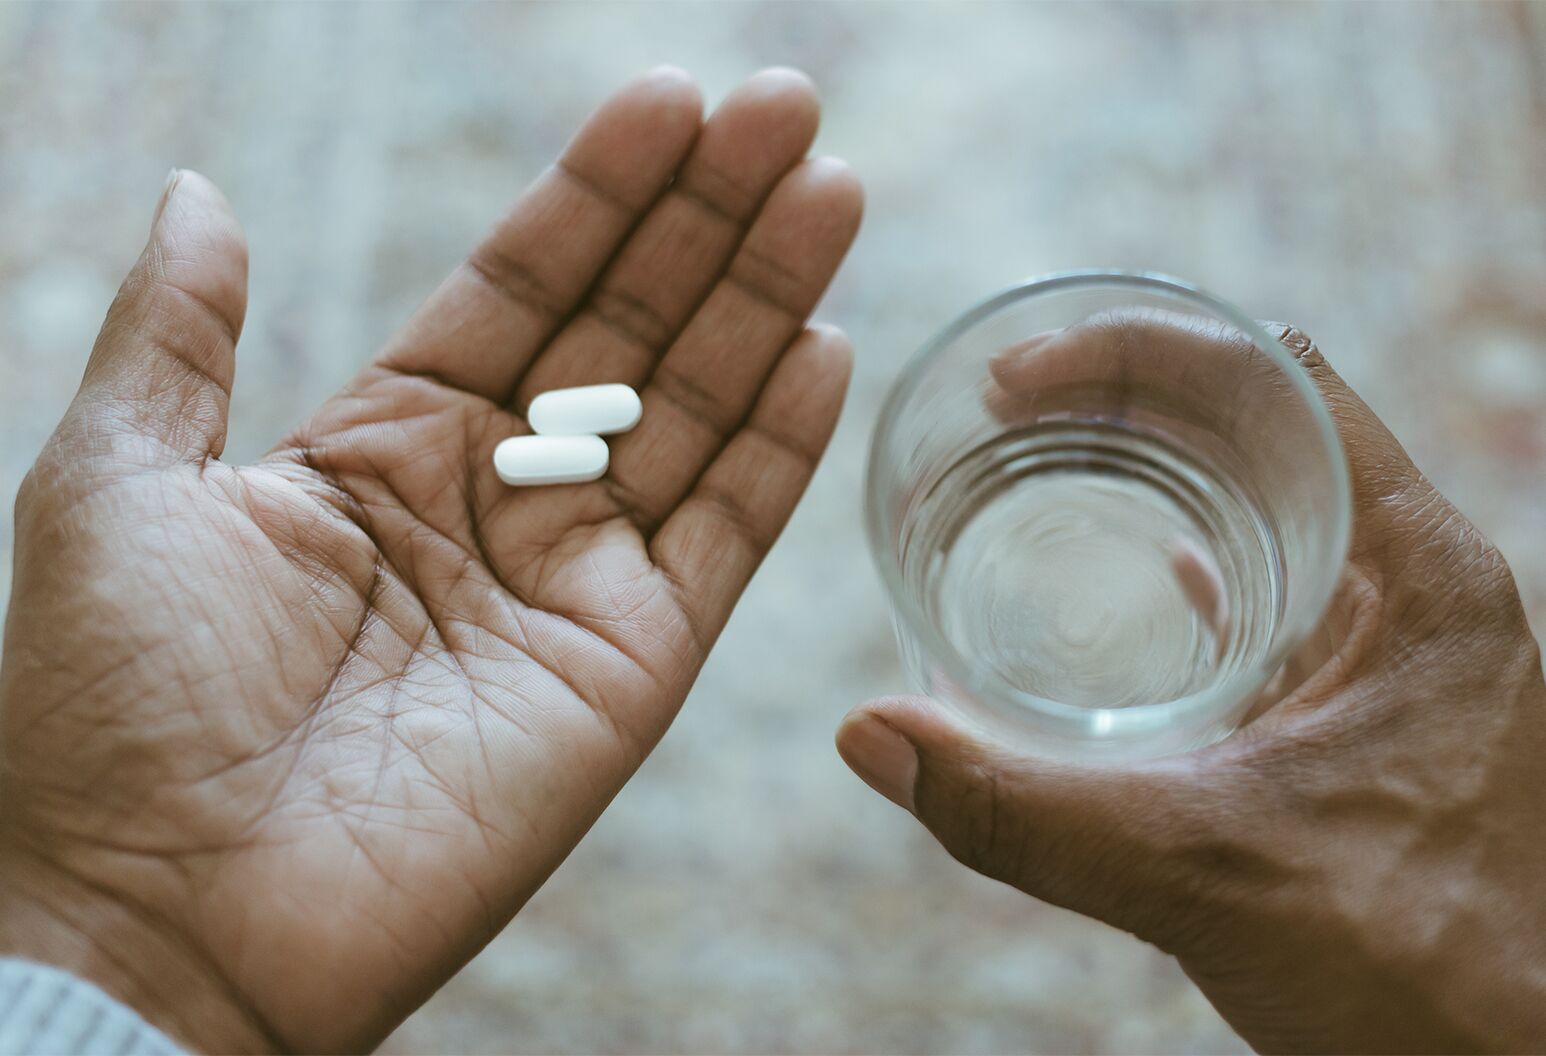 Pain relief beyond pills: Drug alternatives are making a difference